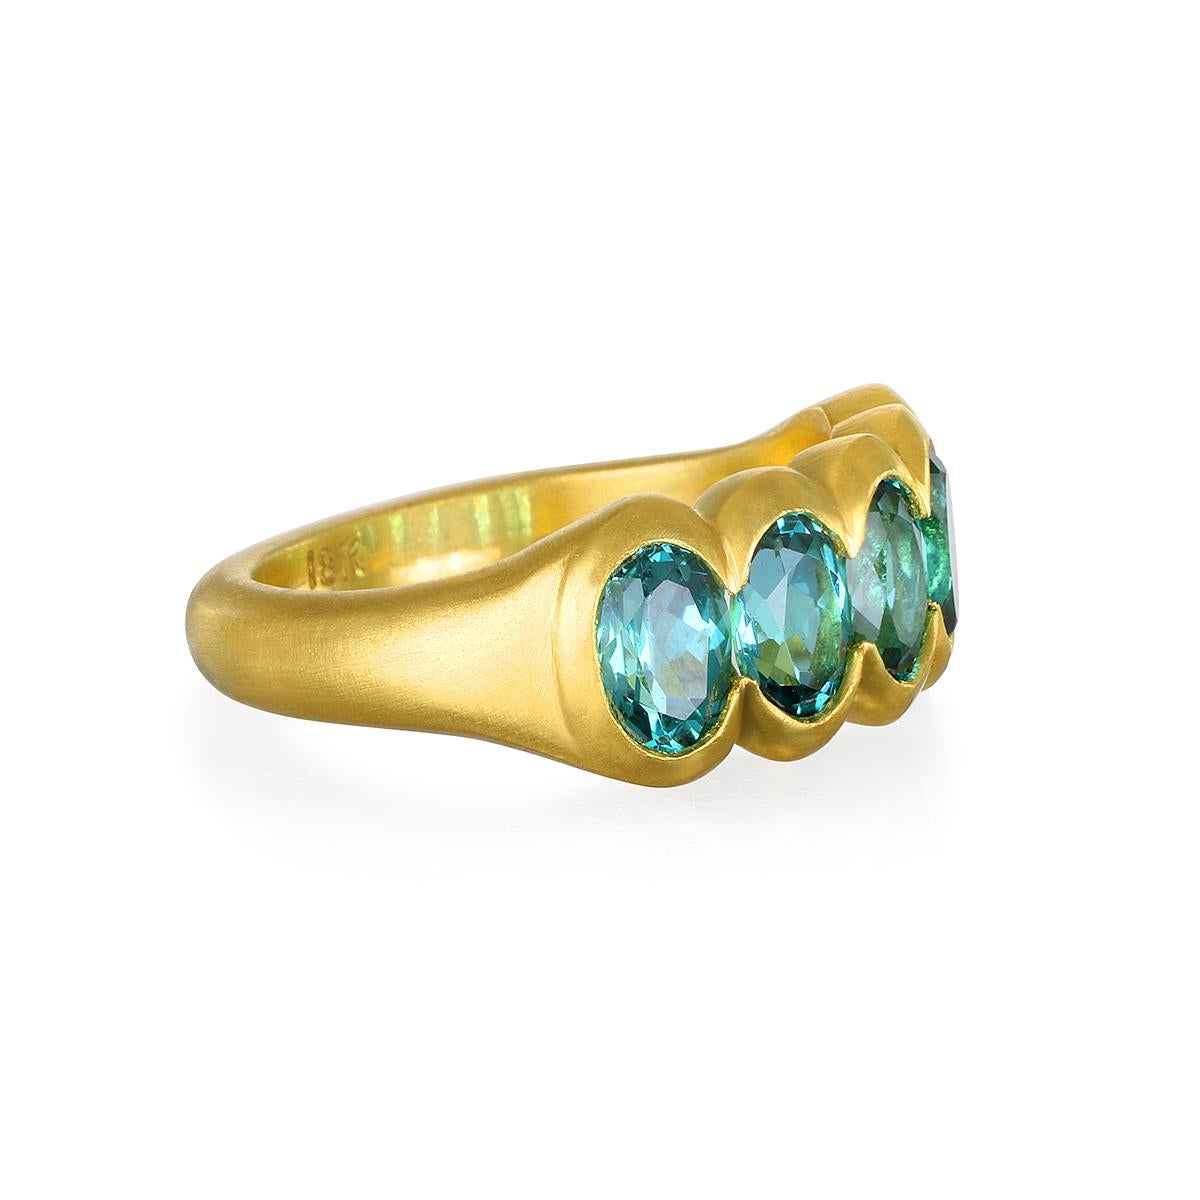 Faye Kim's one of a kind 18 Karat Gold Blue-Green Tourmaline Scallop Ring evokes a feeling of nostalgia yet feels both timeless and modern in its matte finish setting. The ring is a statement piece, and would complement any wardrobe...perfect for